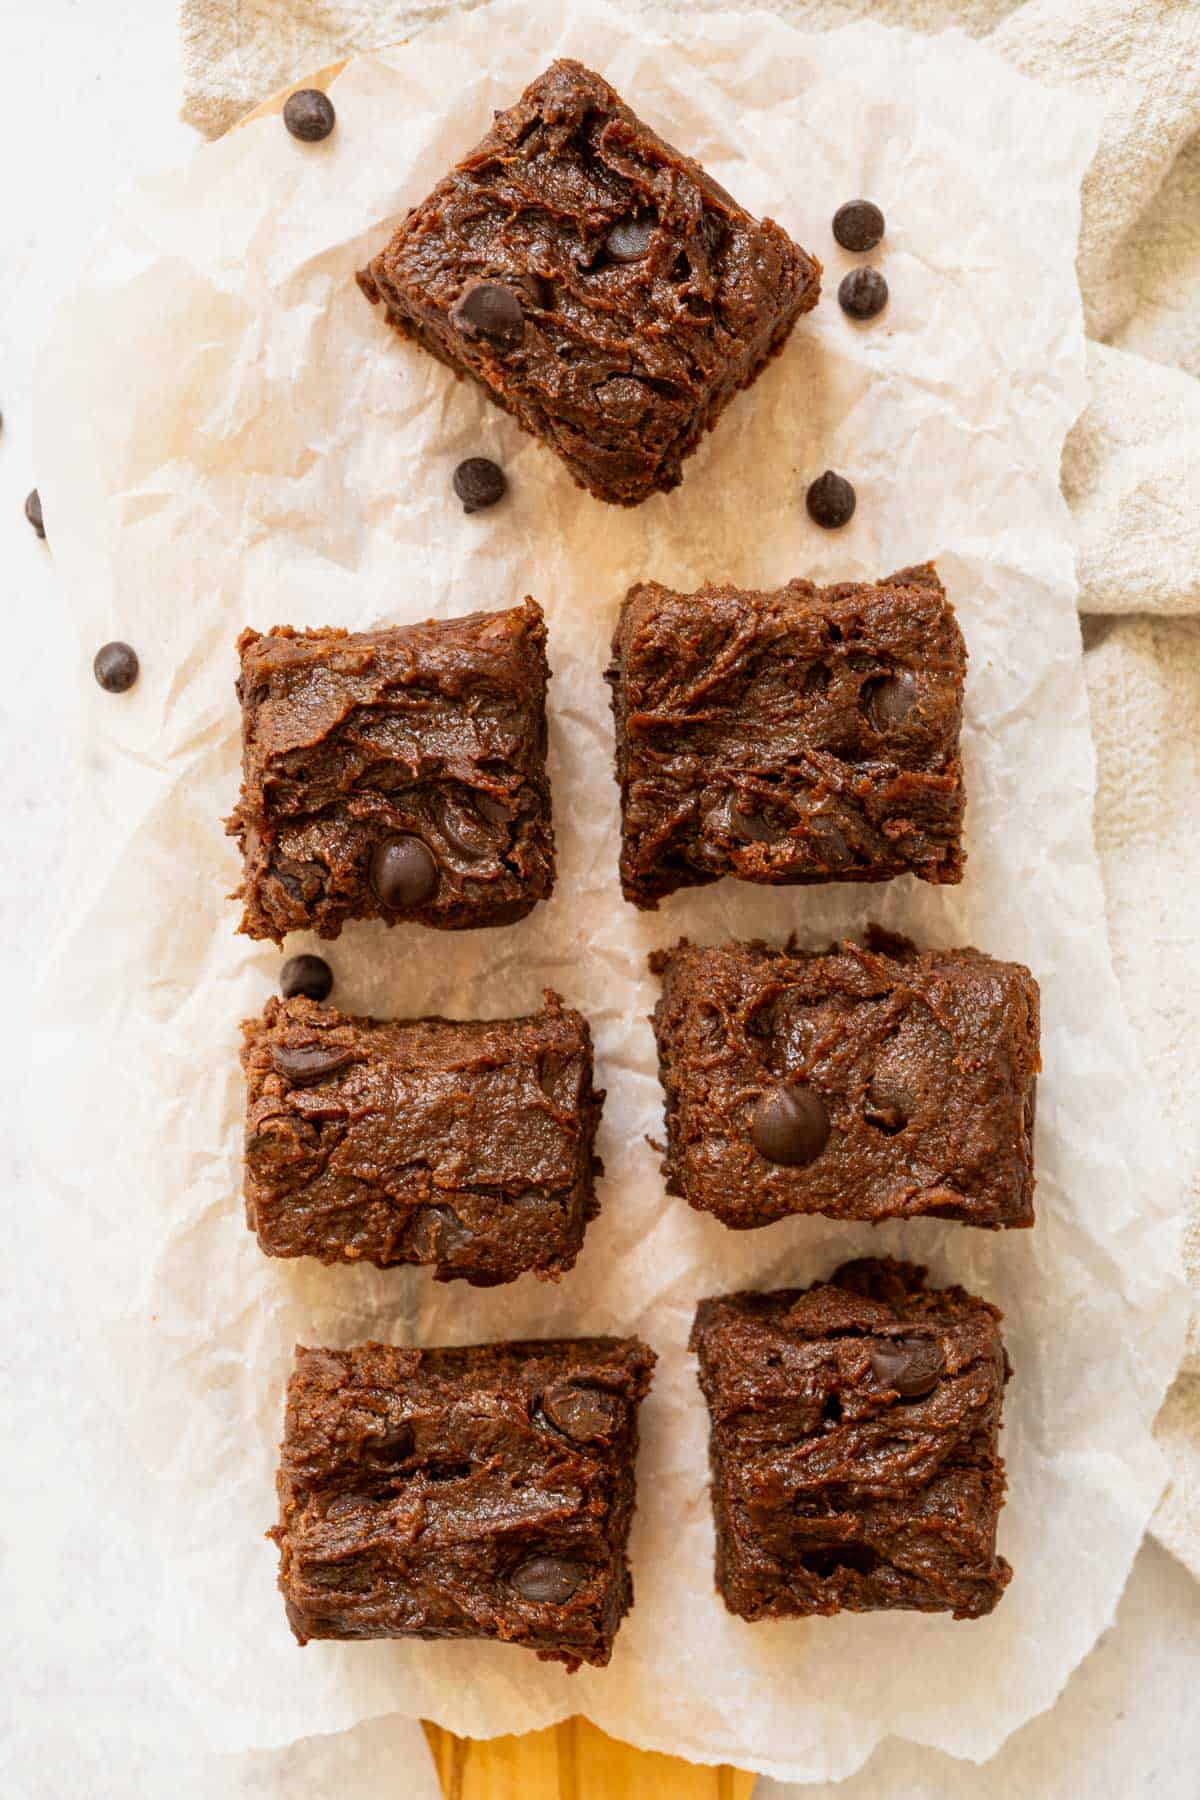 7 cut brownies on parchment paper with scattering of chocolate chips.